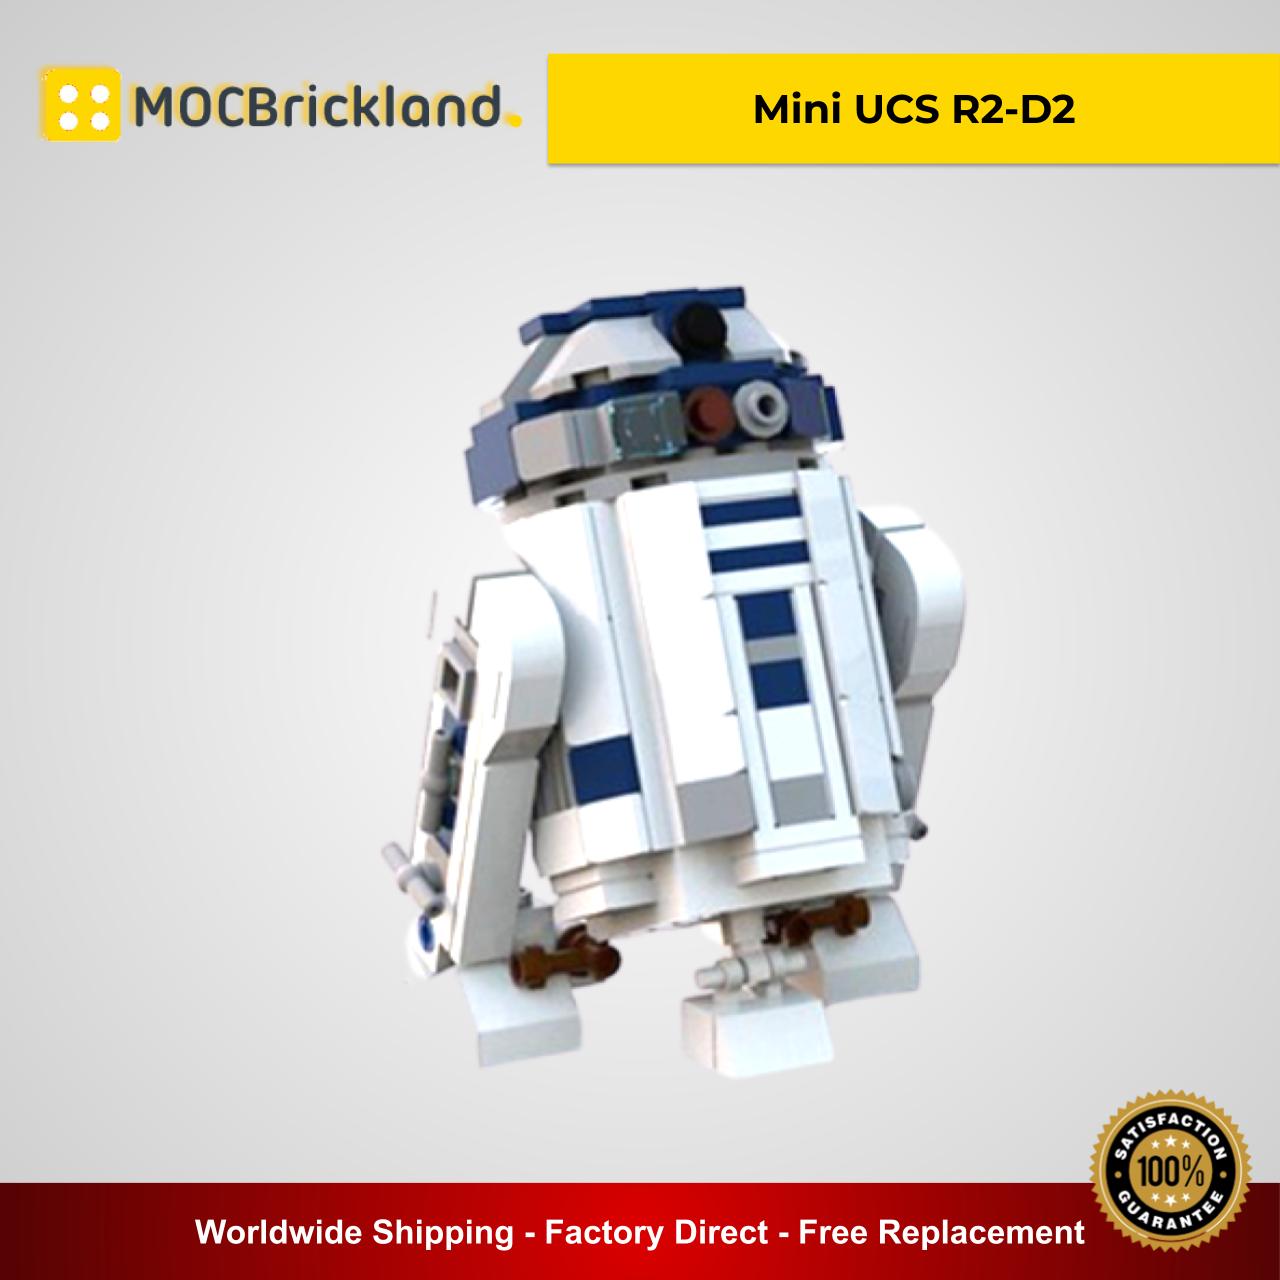 Mini UCS R2-D2 MOC 6266 Star Wars Designed By Miro With 248 Pieces